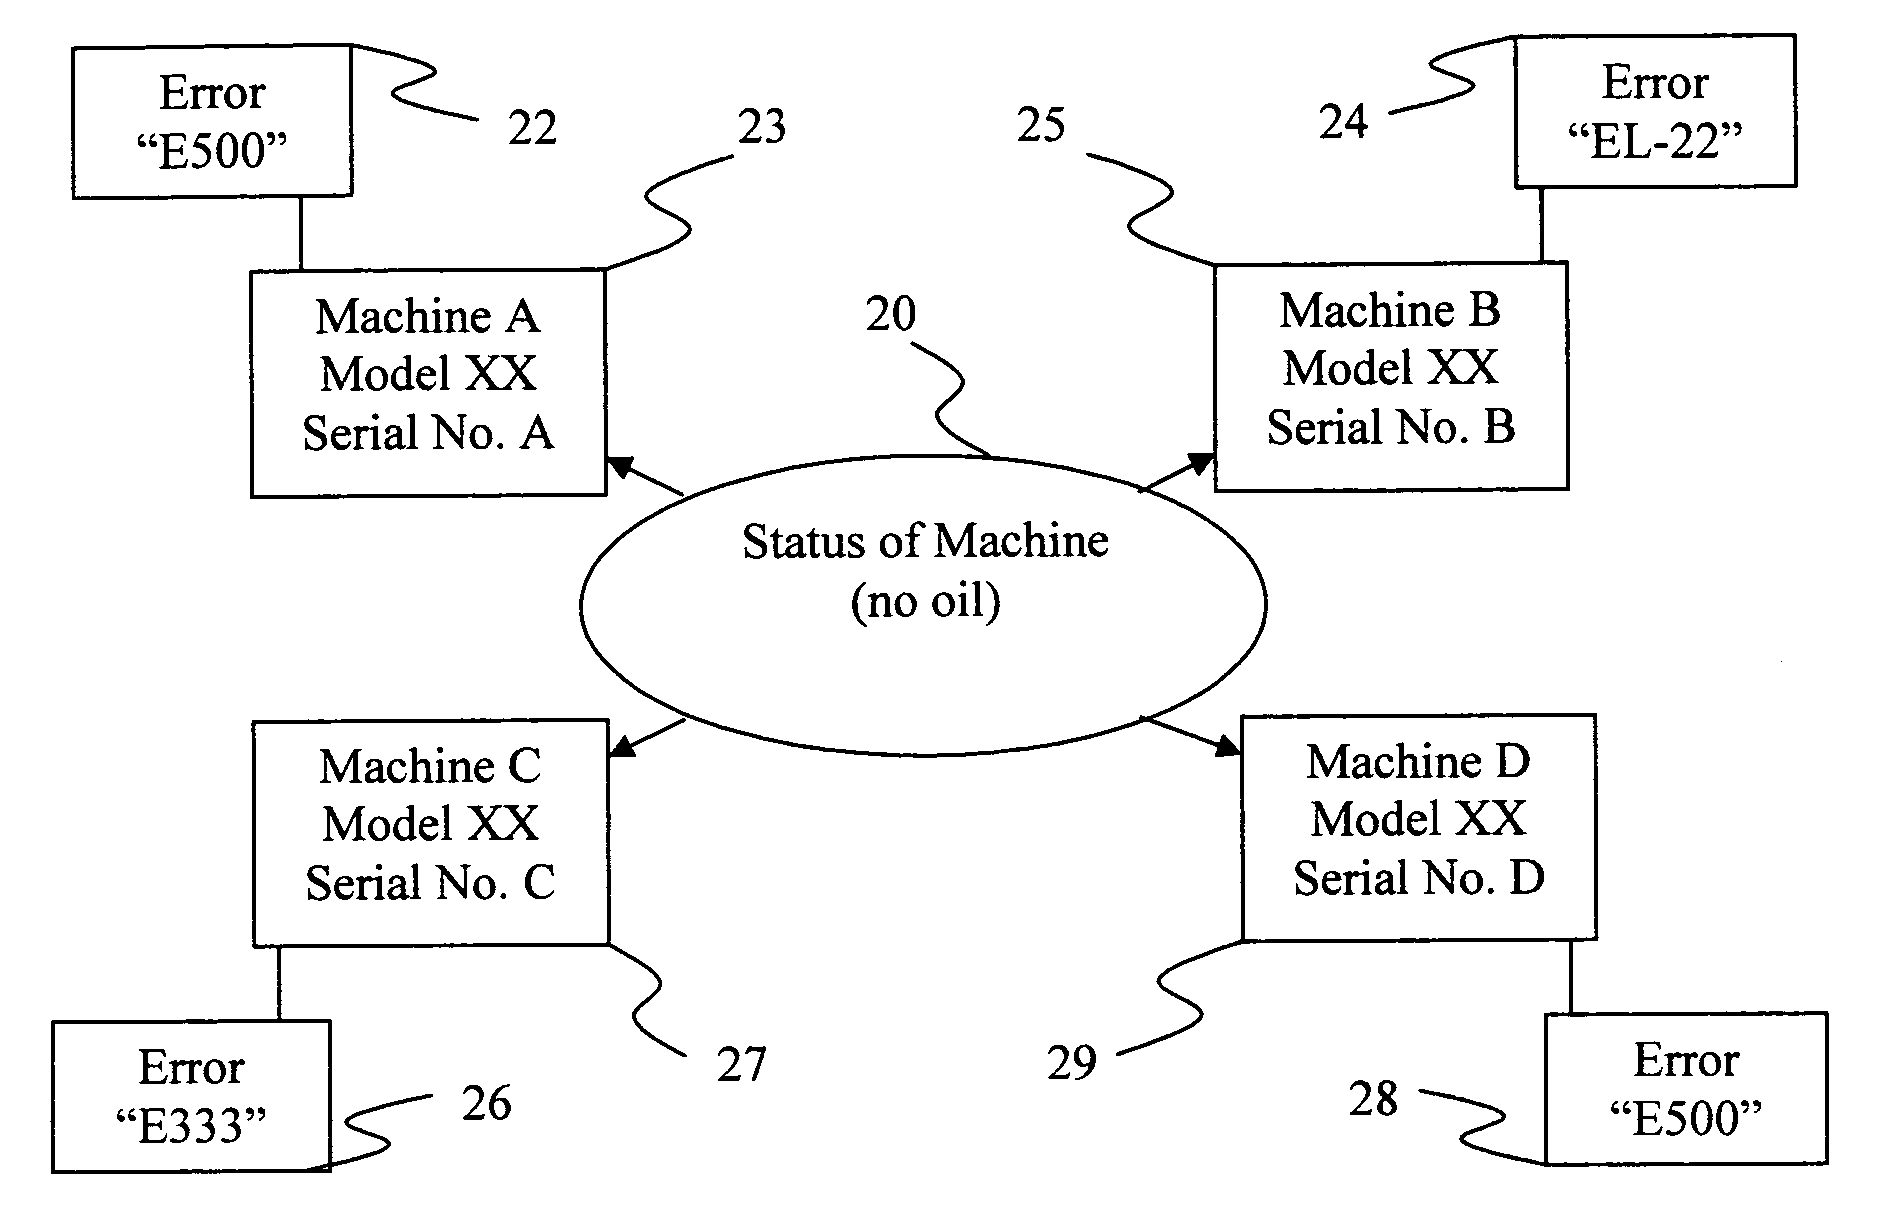 Method for providing serialized technical support